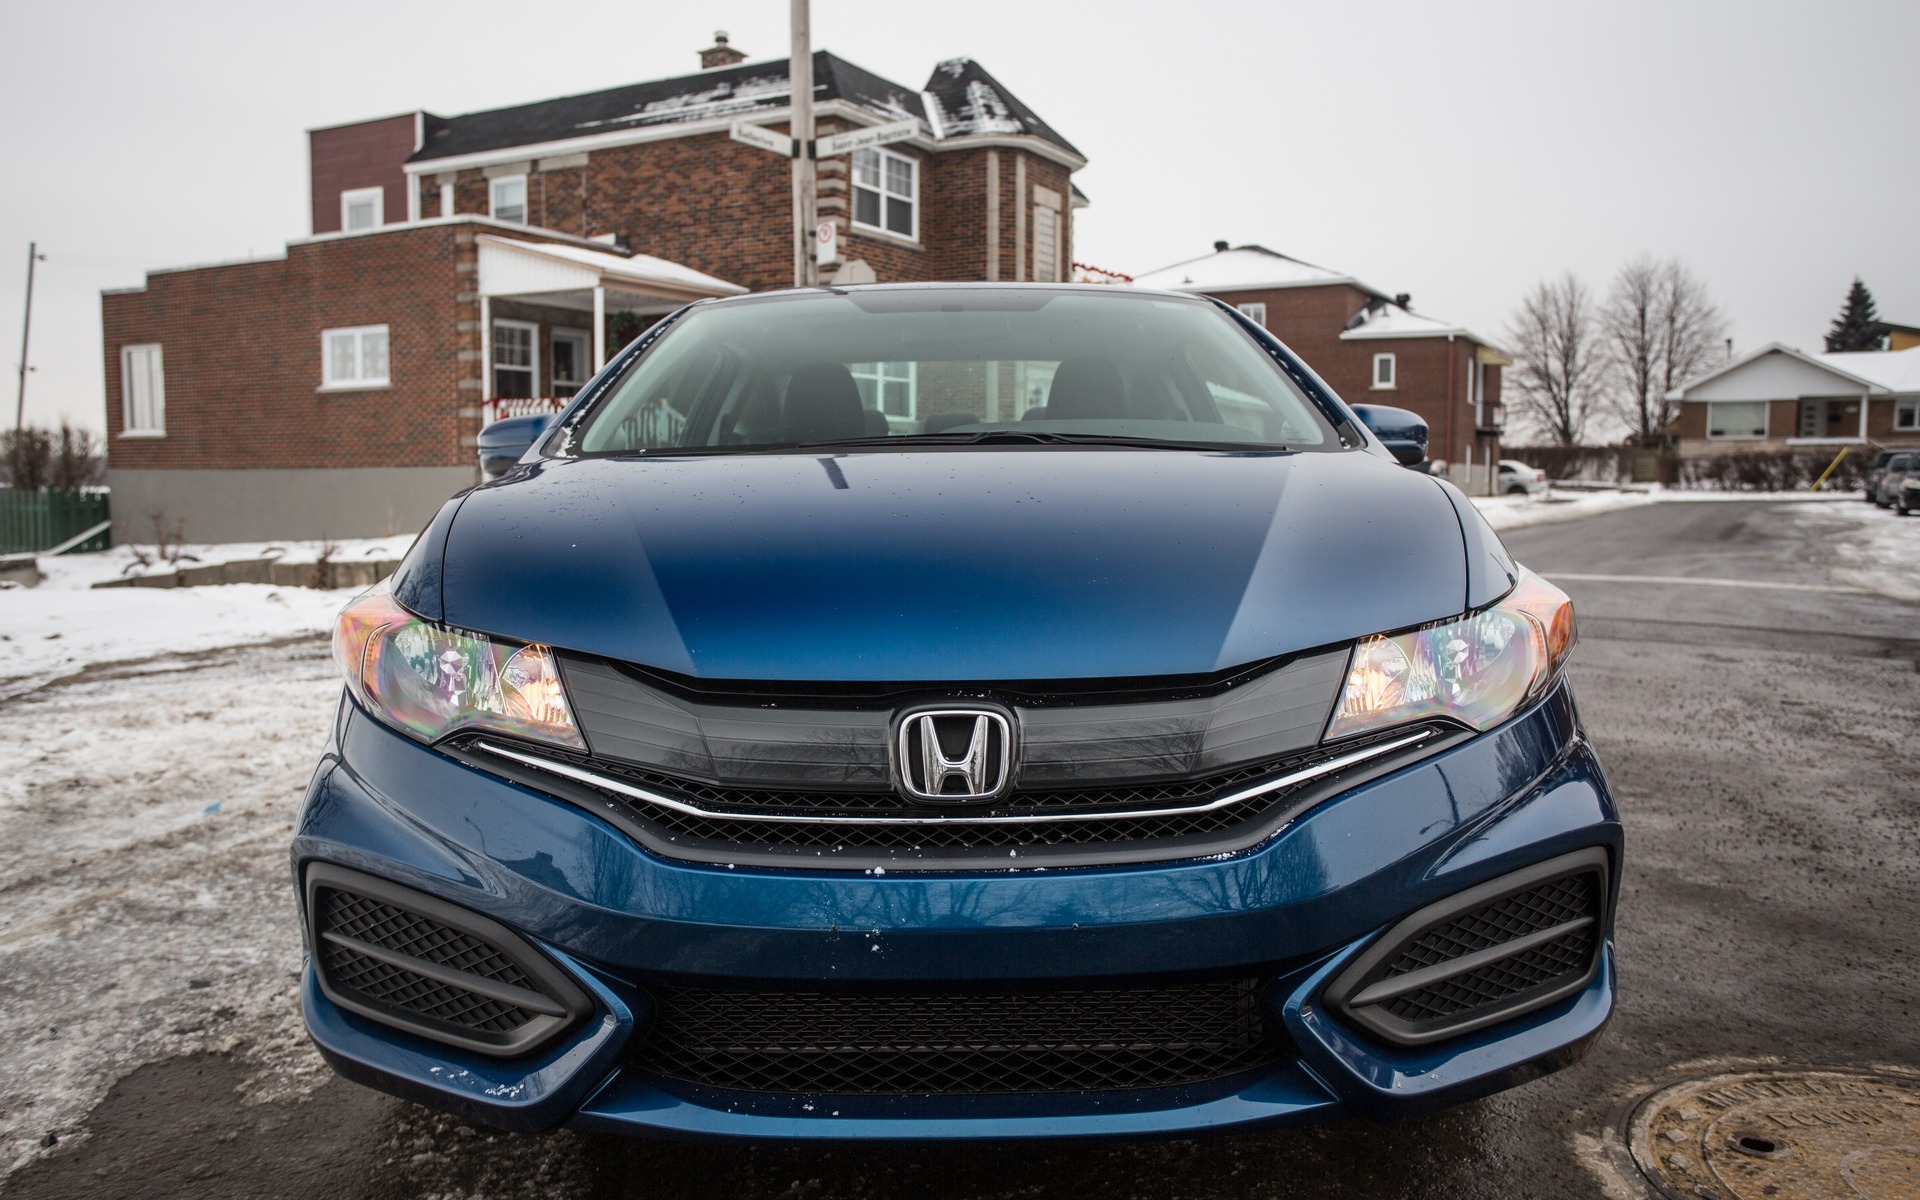 The 2015 Civic’s profile is the same as last year's model.